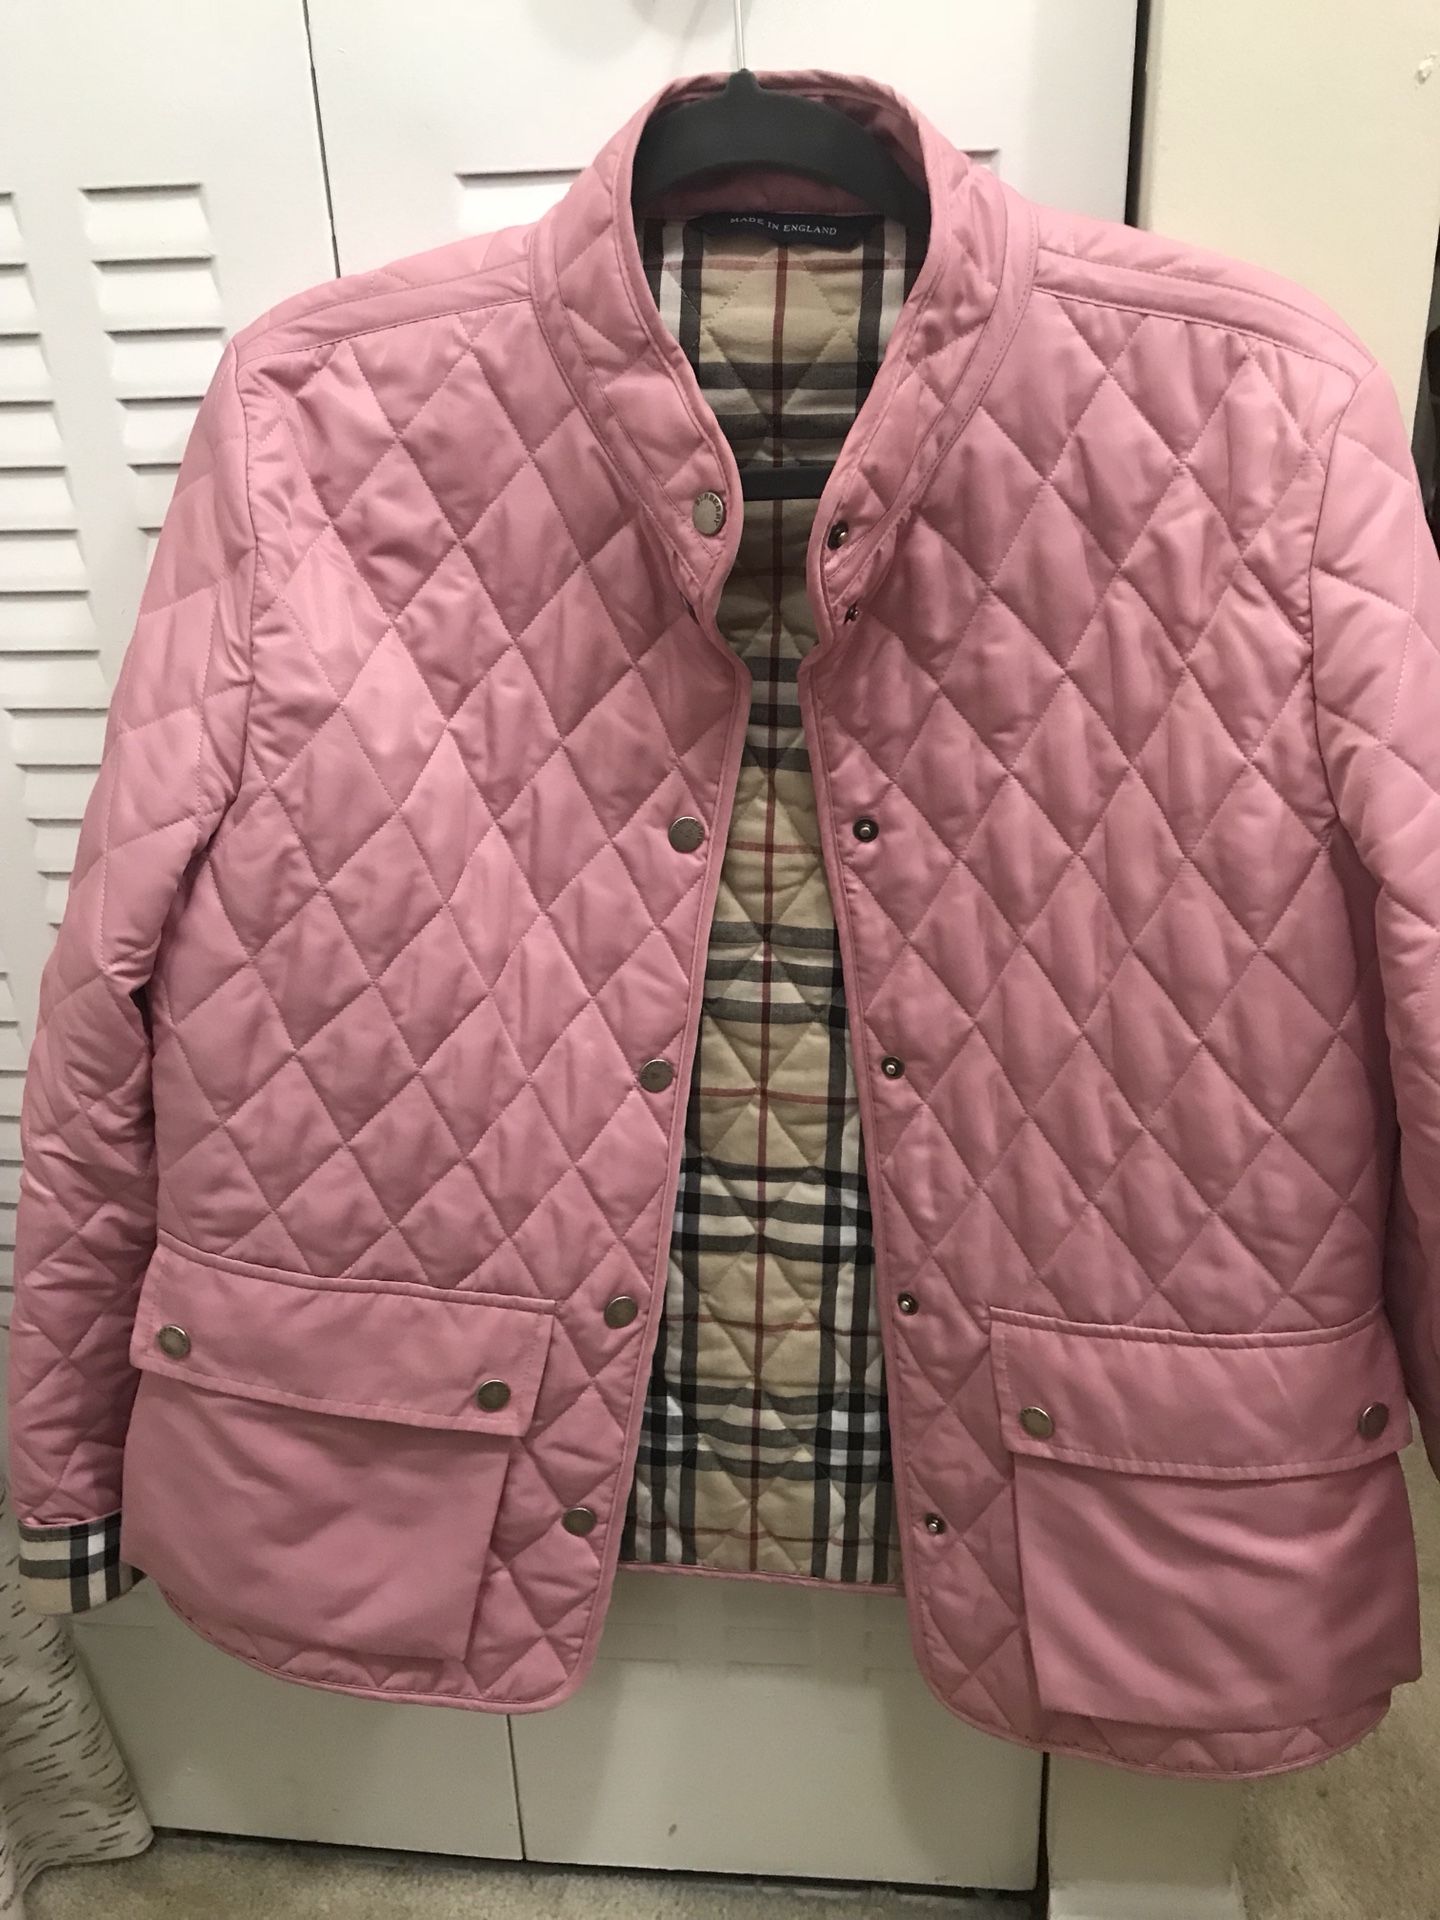 Pink Burberry Jacket size S/M